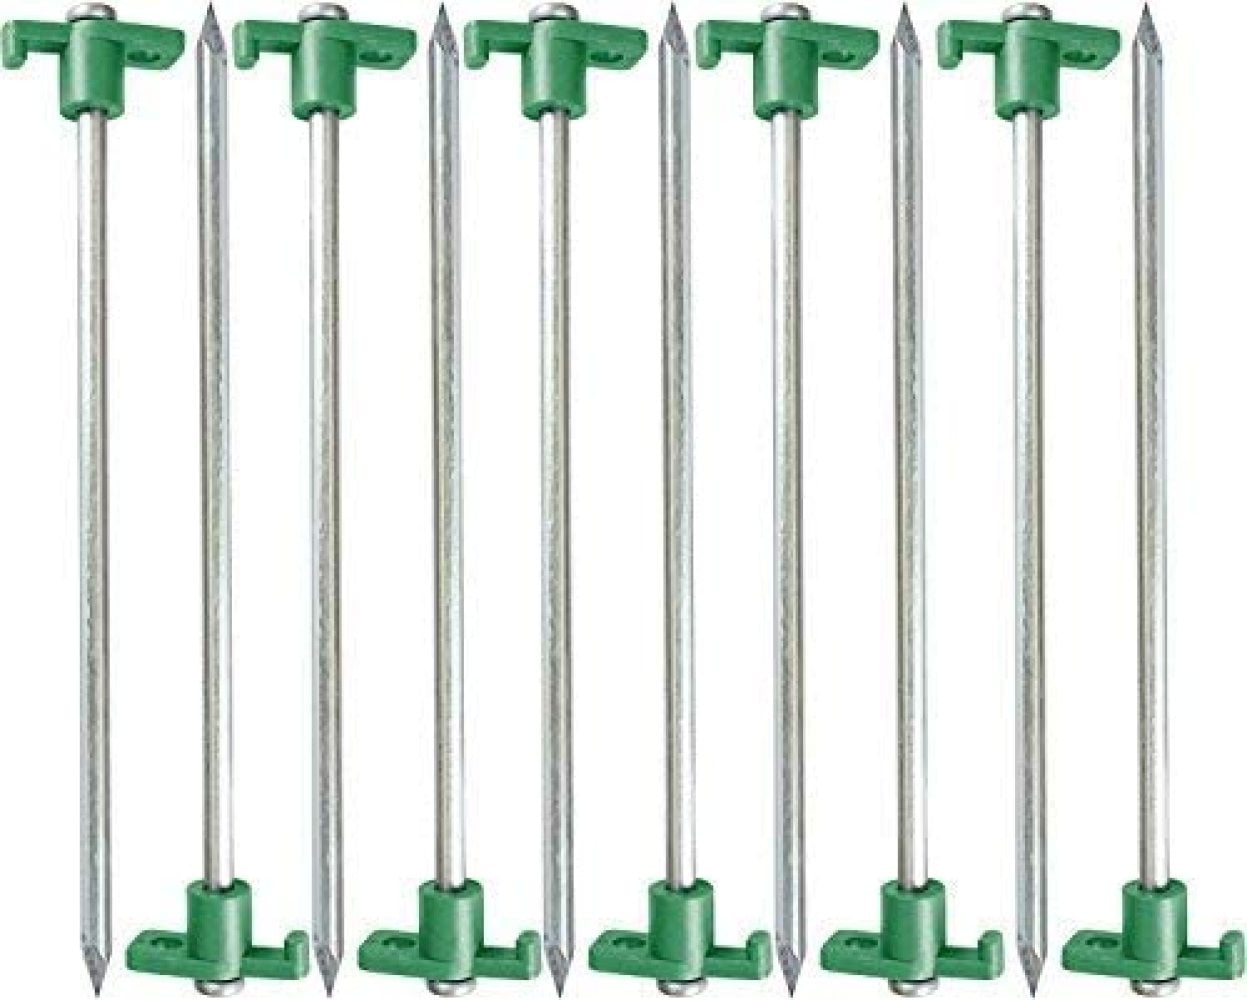 10pc  Heavy Duty Galvanized Metal Roundwire Tent Pegs/Gazebo Securing Pegs 